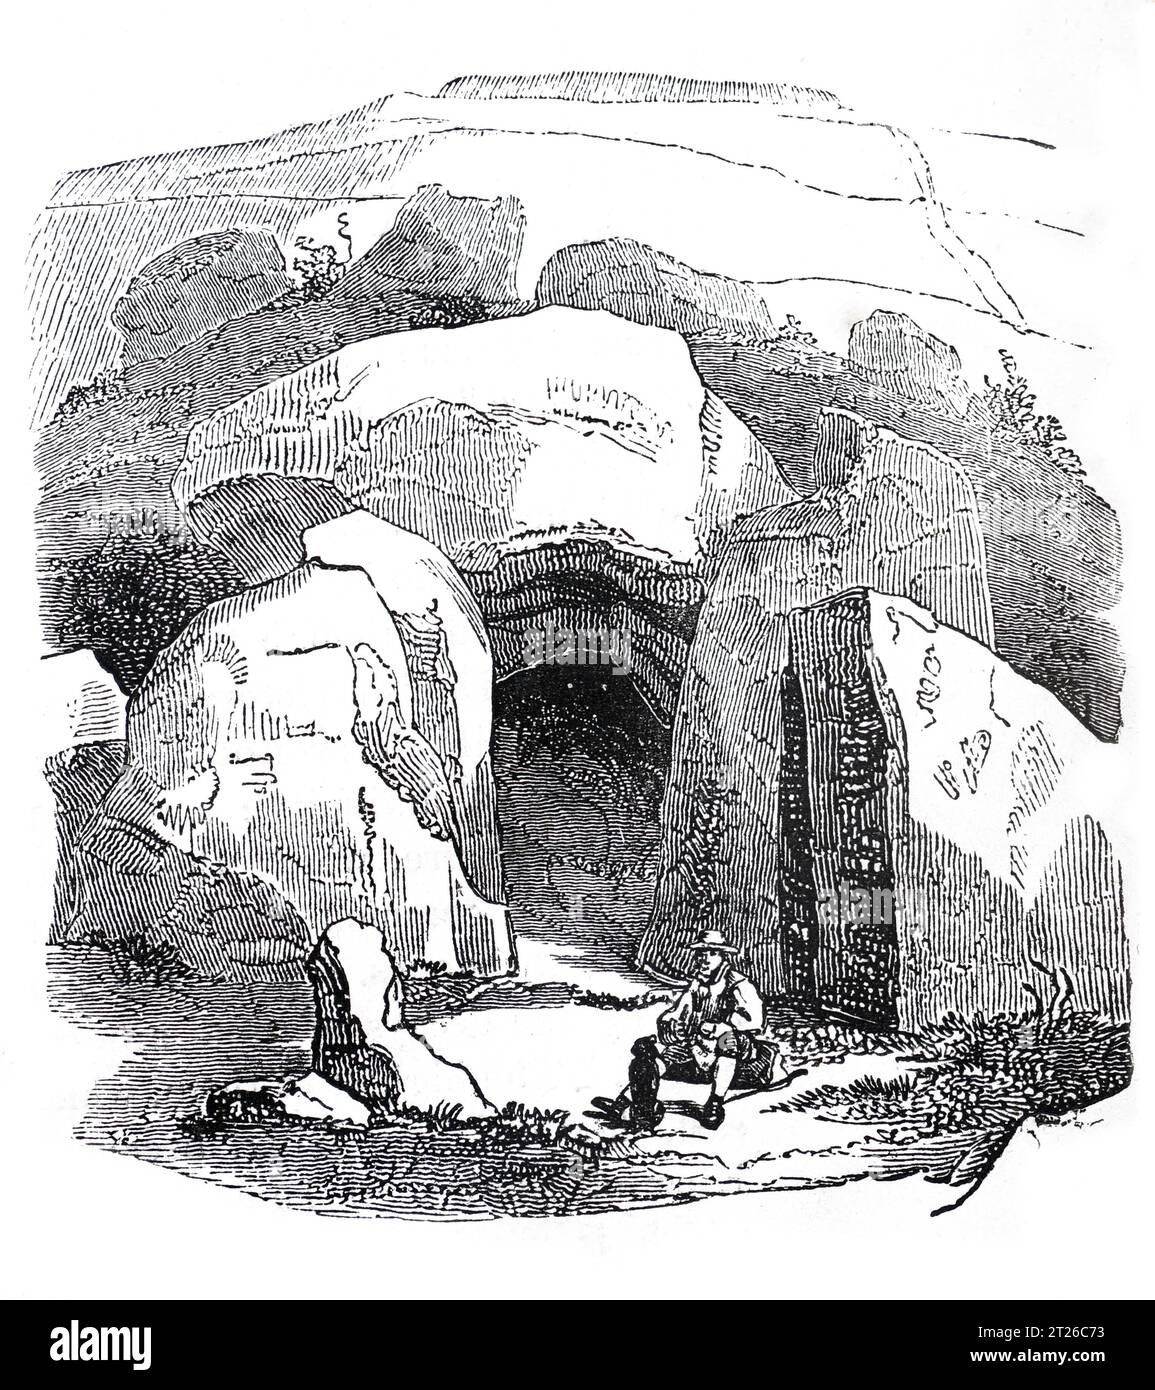 Wayland Smith's Cave, or Wayland's Smithy, Ashbury, Oxfordshire, a Neolithic chambered long barrow, once thought to be the home of Wayland, the Saxon God of metalworking. Black and White Illustration from the 'Old England' published by James Sangster in 1860. Stock Photo